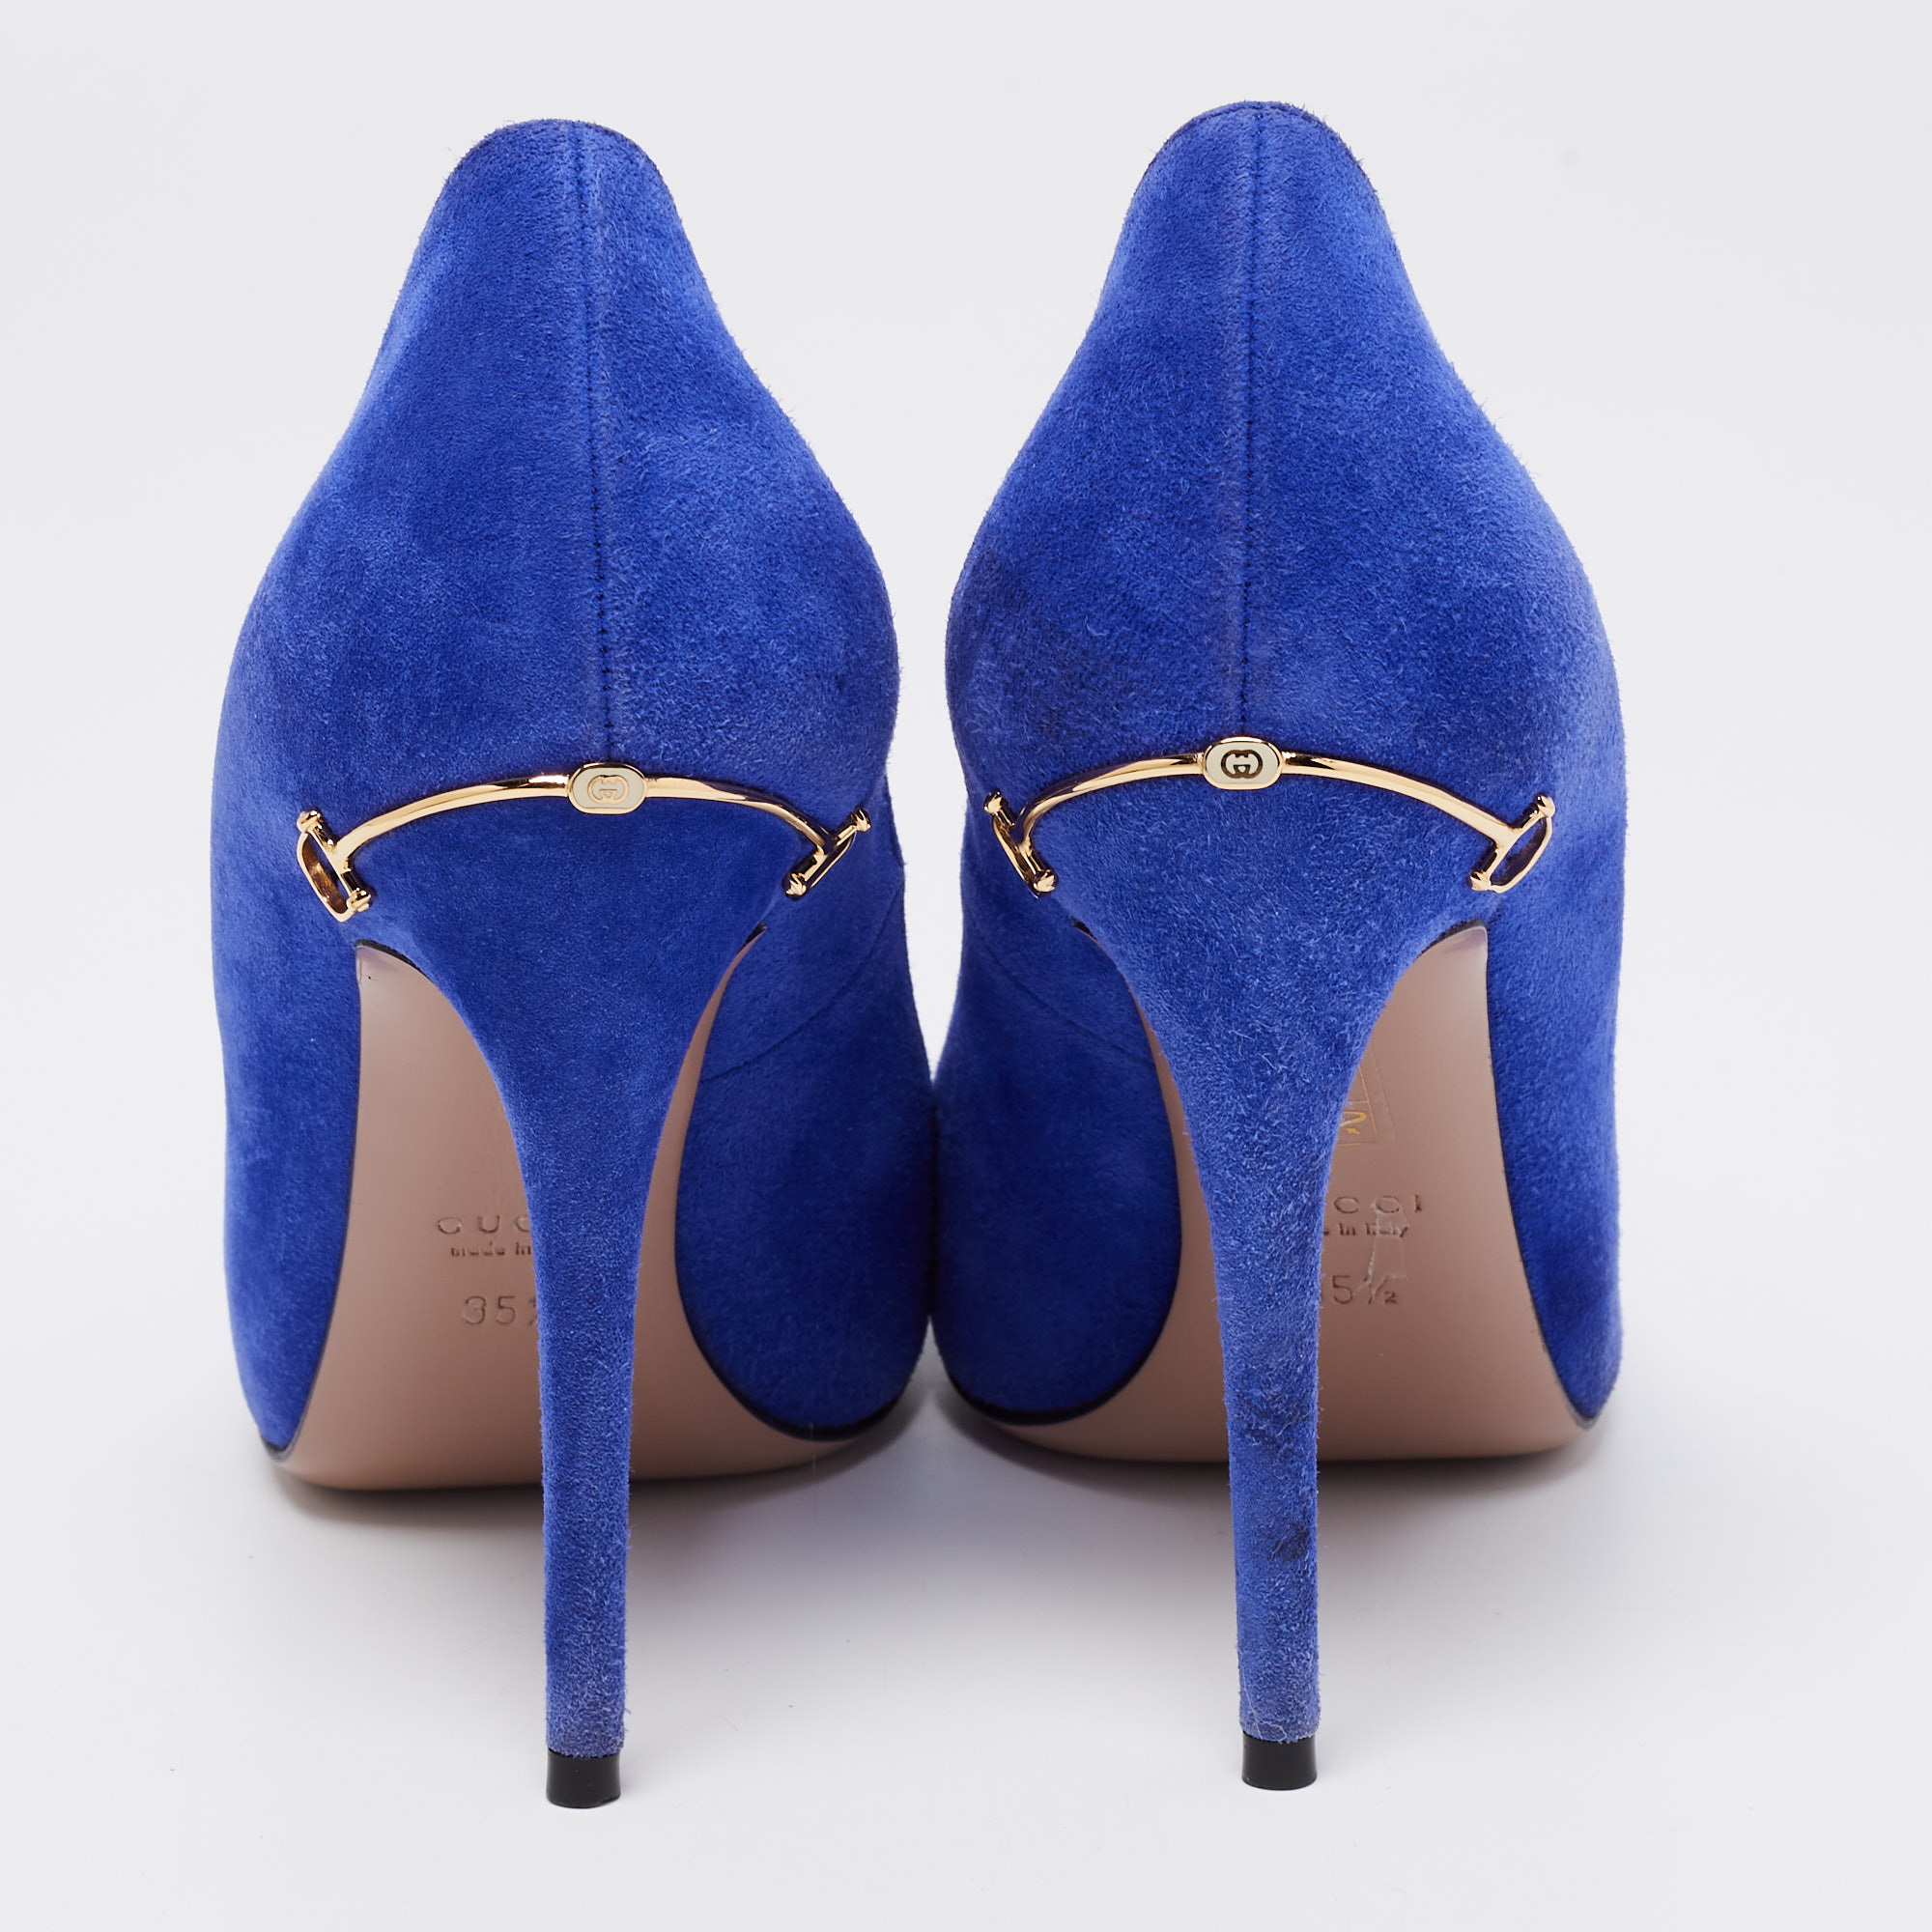 Gucci Blue Suede Pointed Toe Pumps Size 35.5